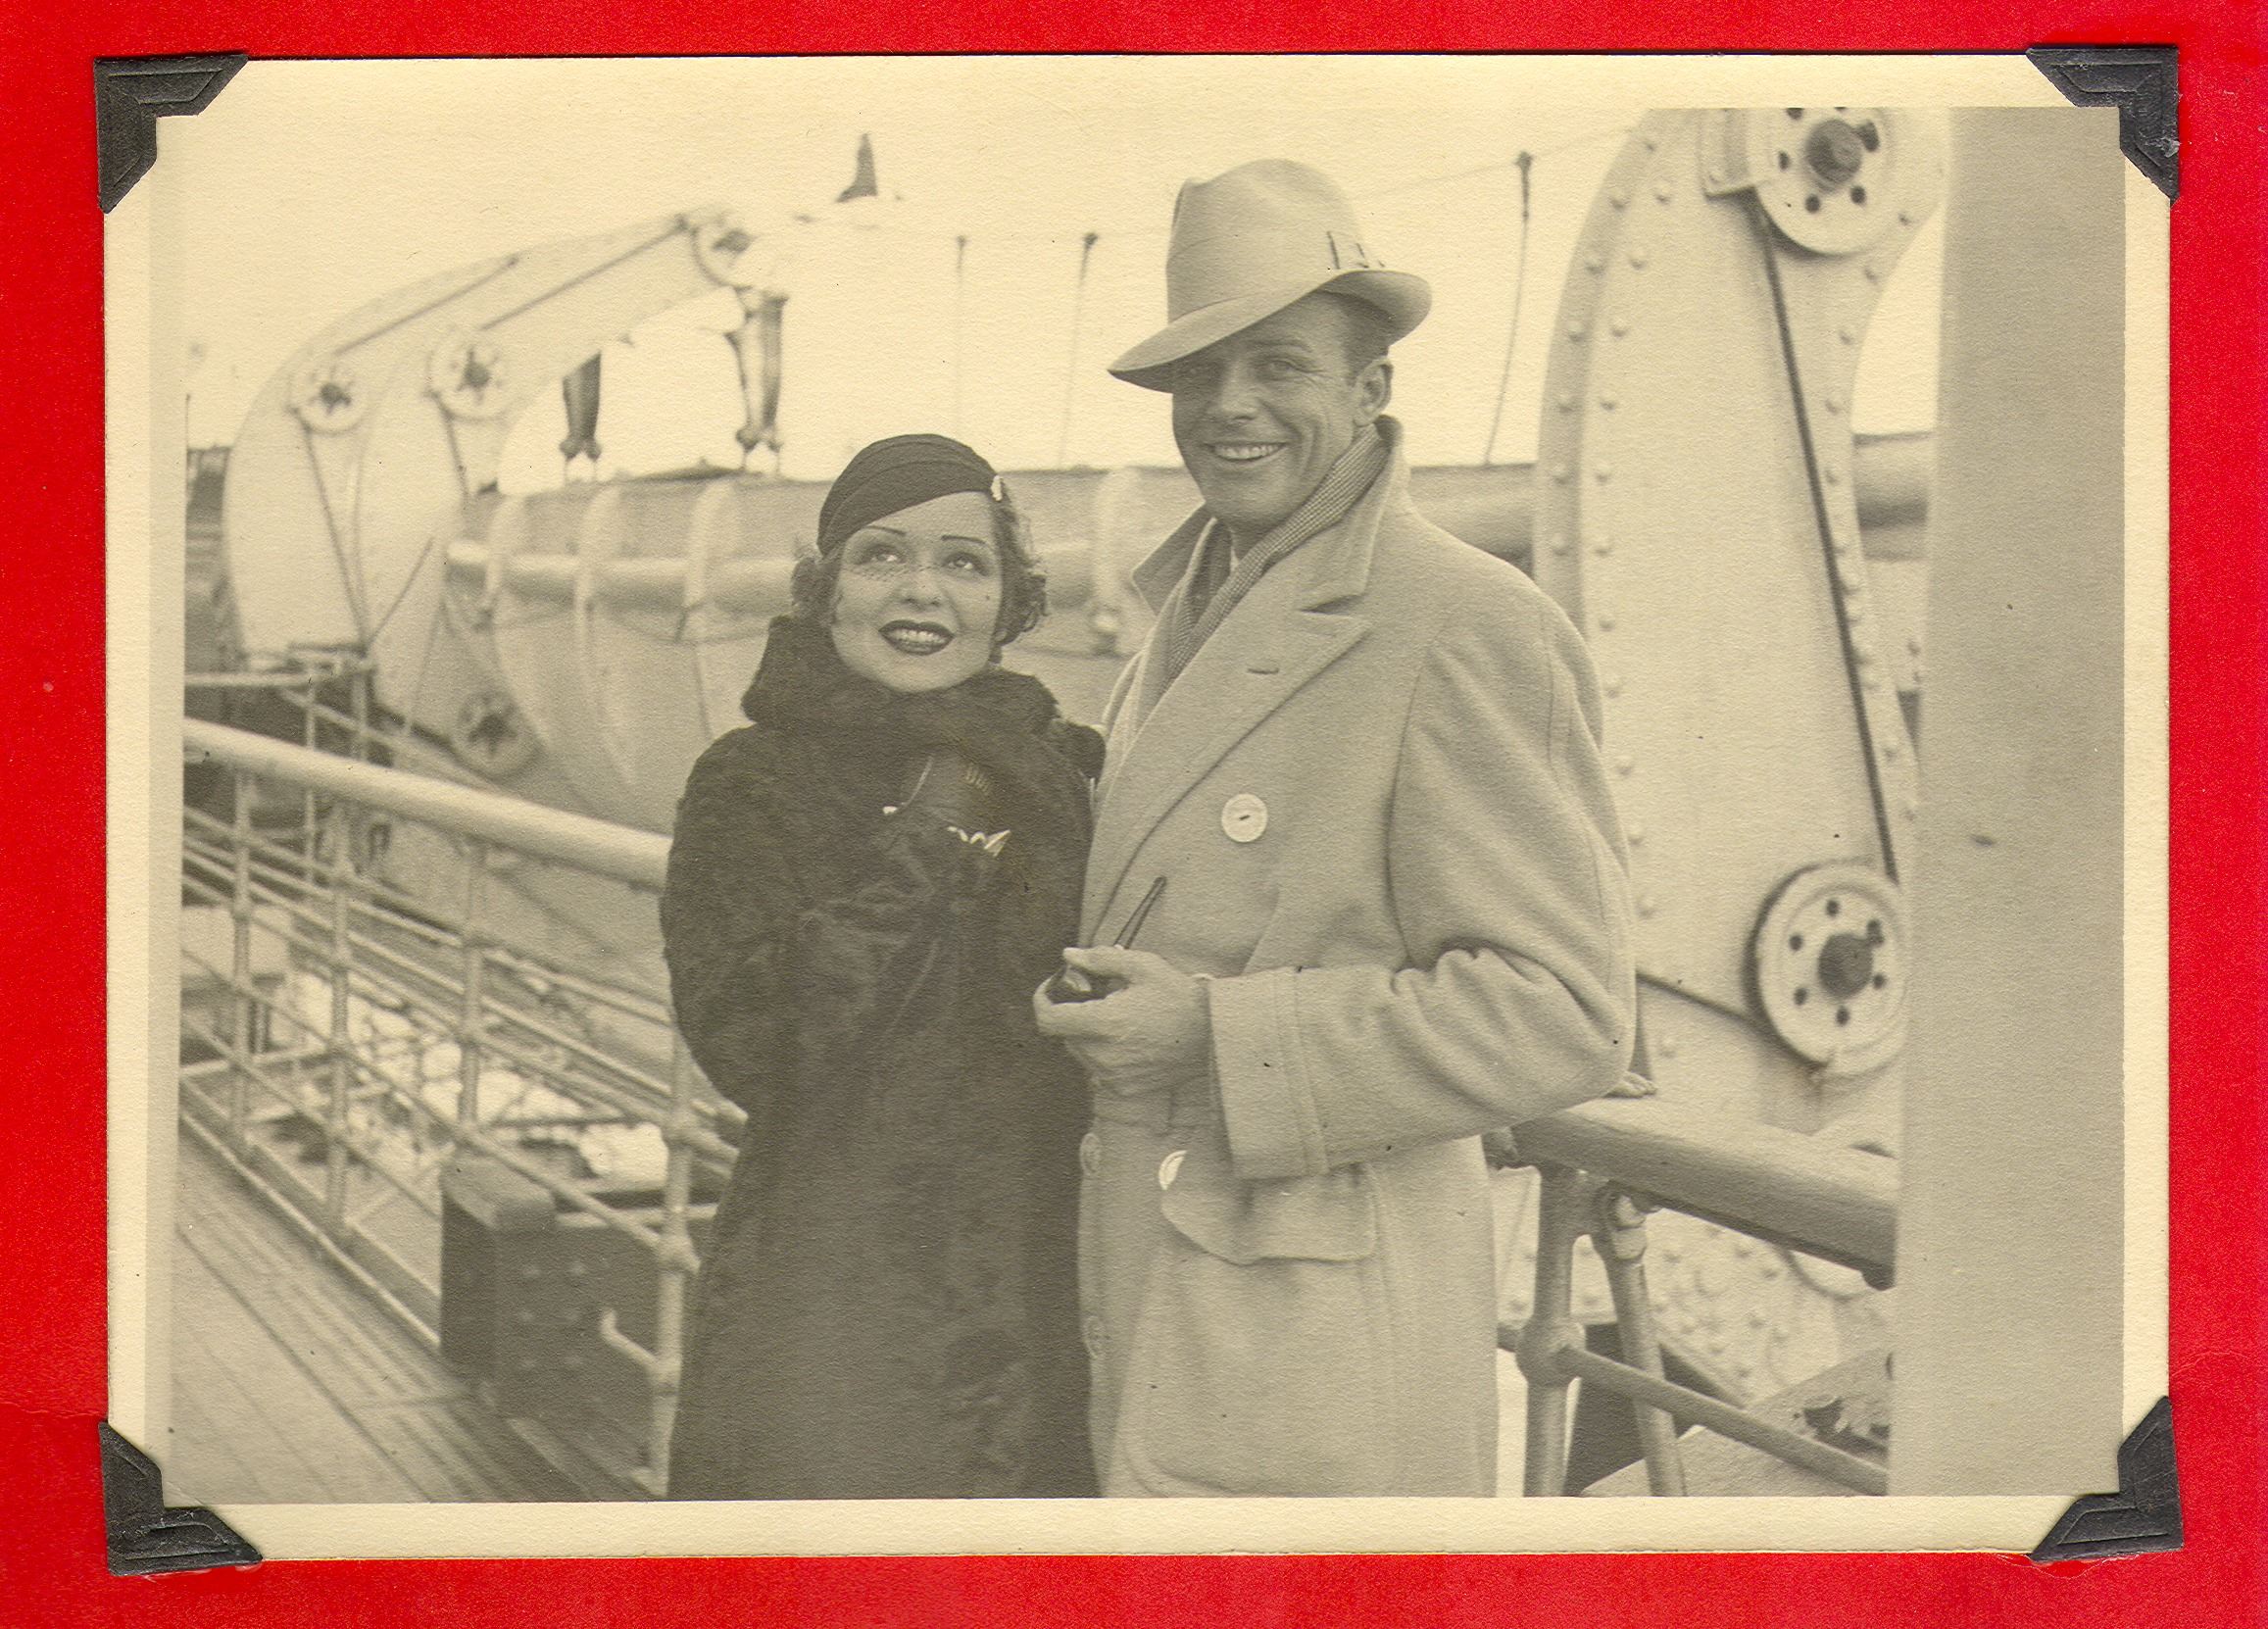 Clara Bow Bell and Rex Bell on board ship during their honeymoon: photographic print